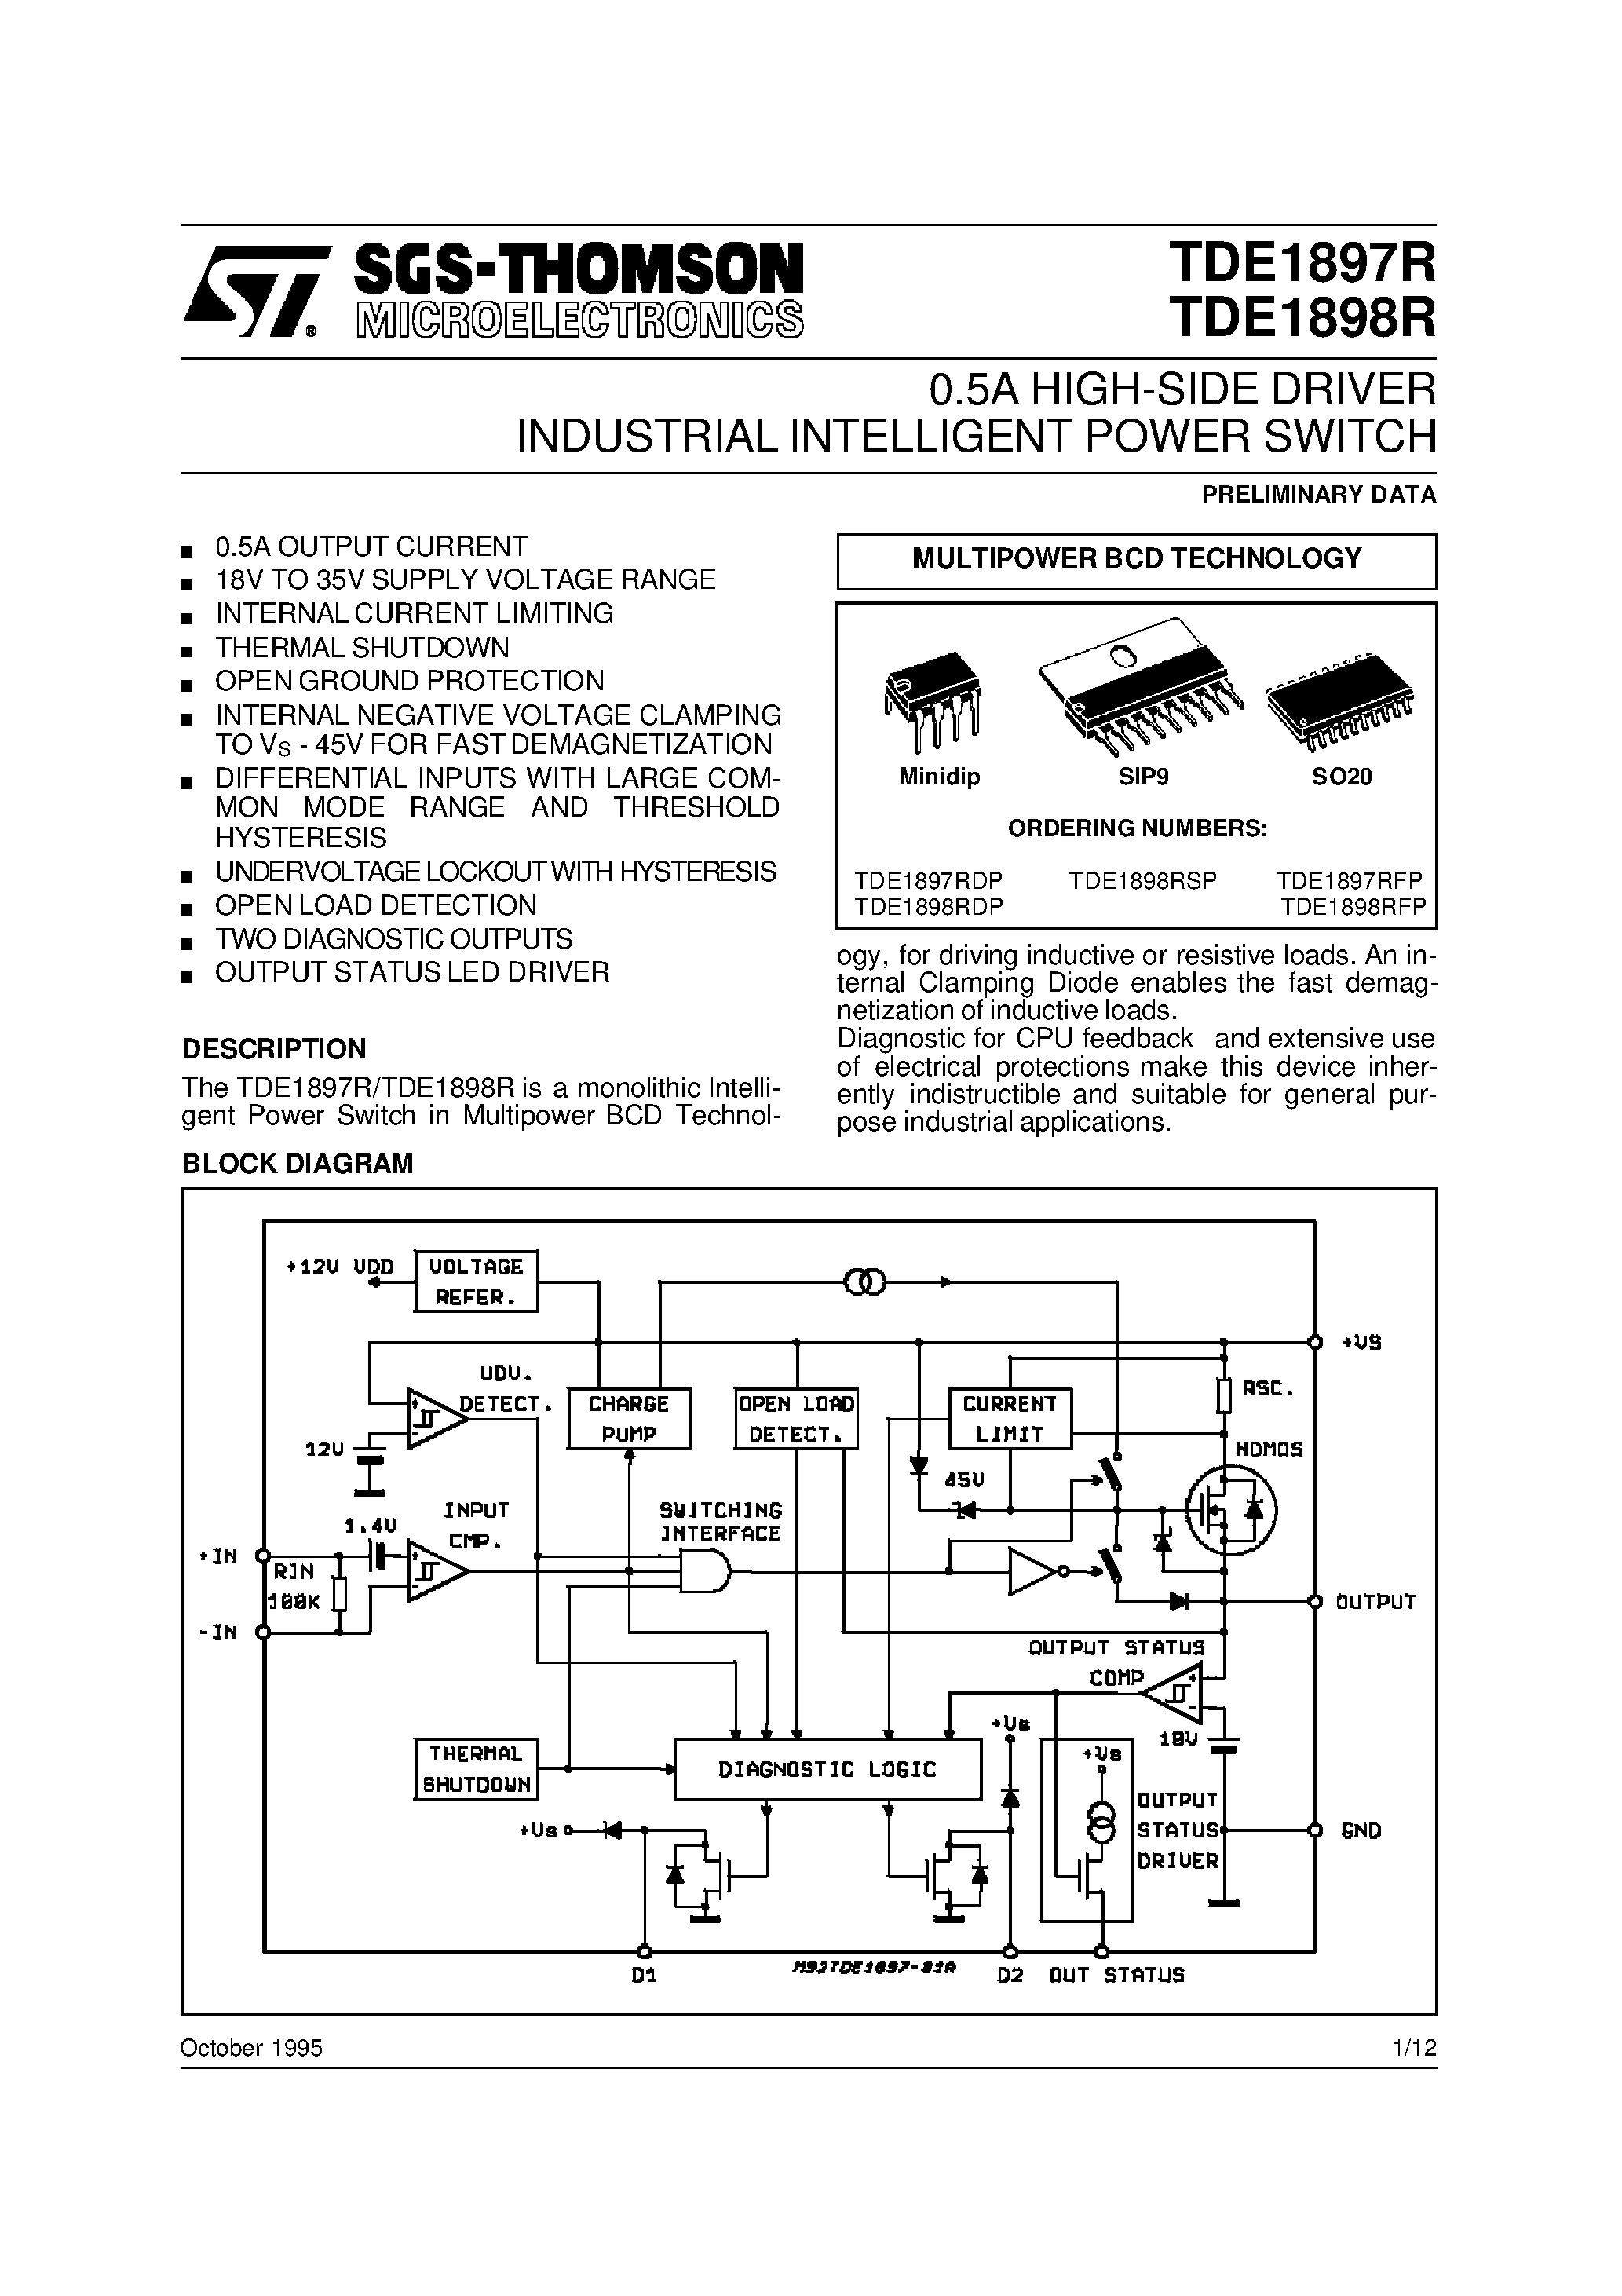 Datasheet TDE1897R - 0.5A HIGH-SIDE DRIVER INDUSTRIAL INTELLIGENT POWER SWITCH page 1